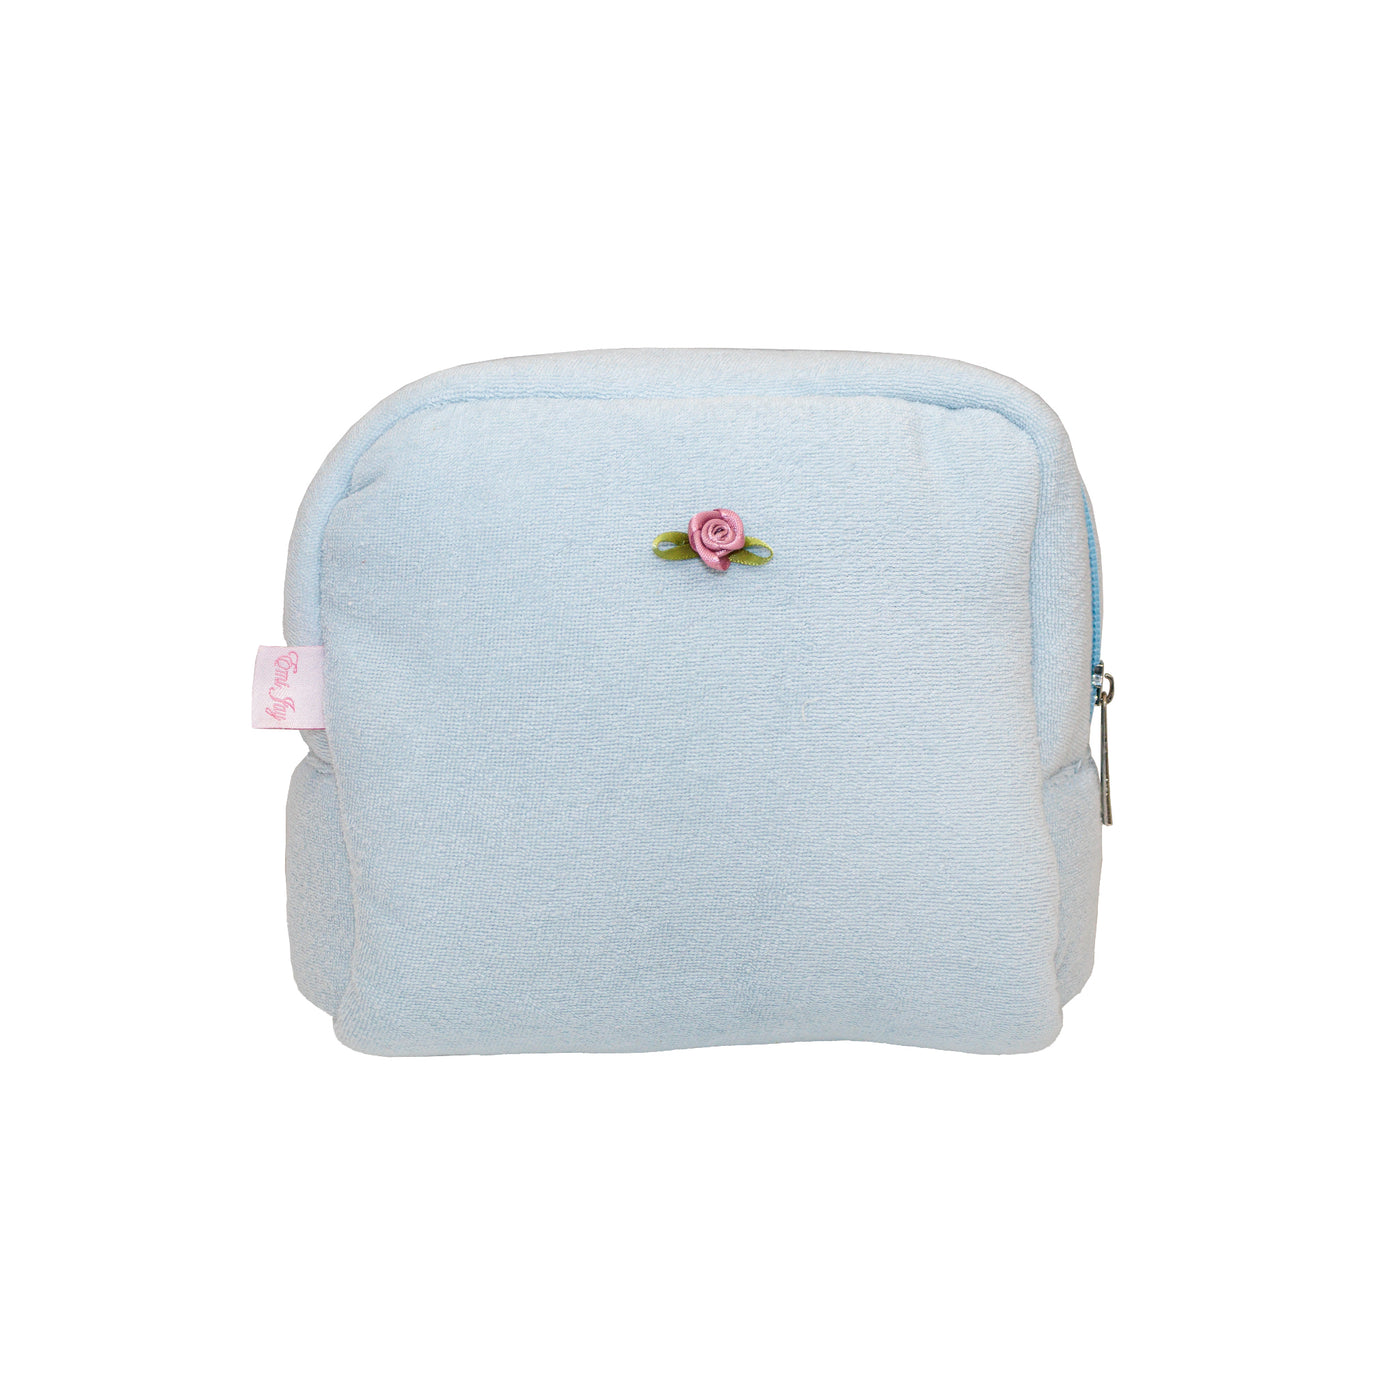 Sweet Like Honey Pouch in Airy Blue